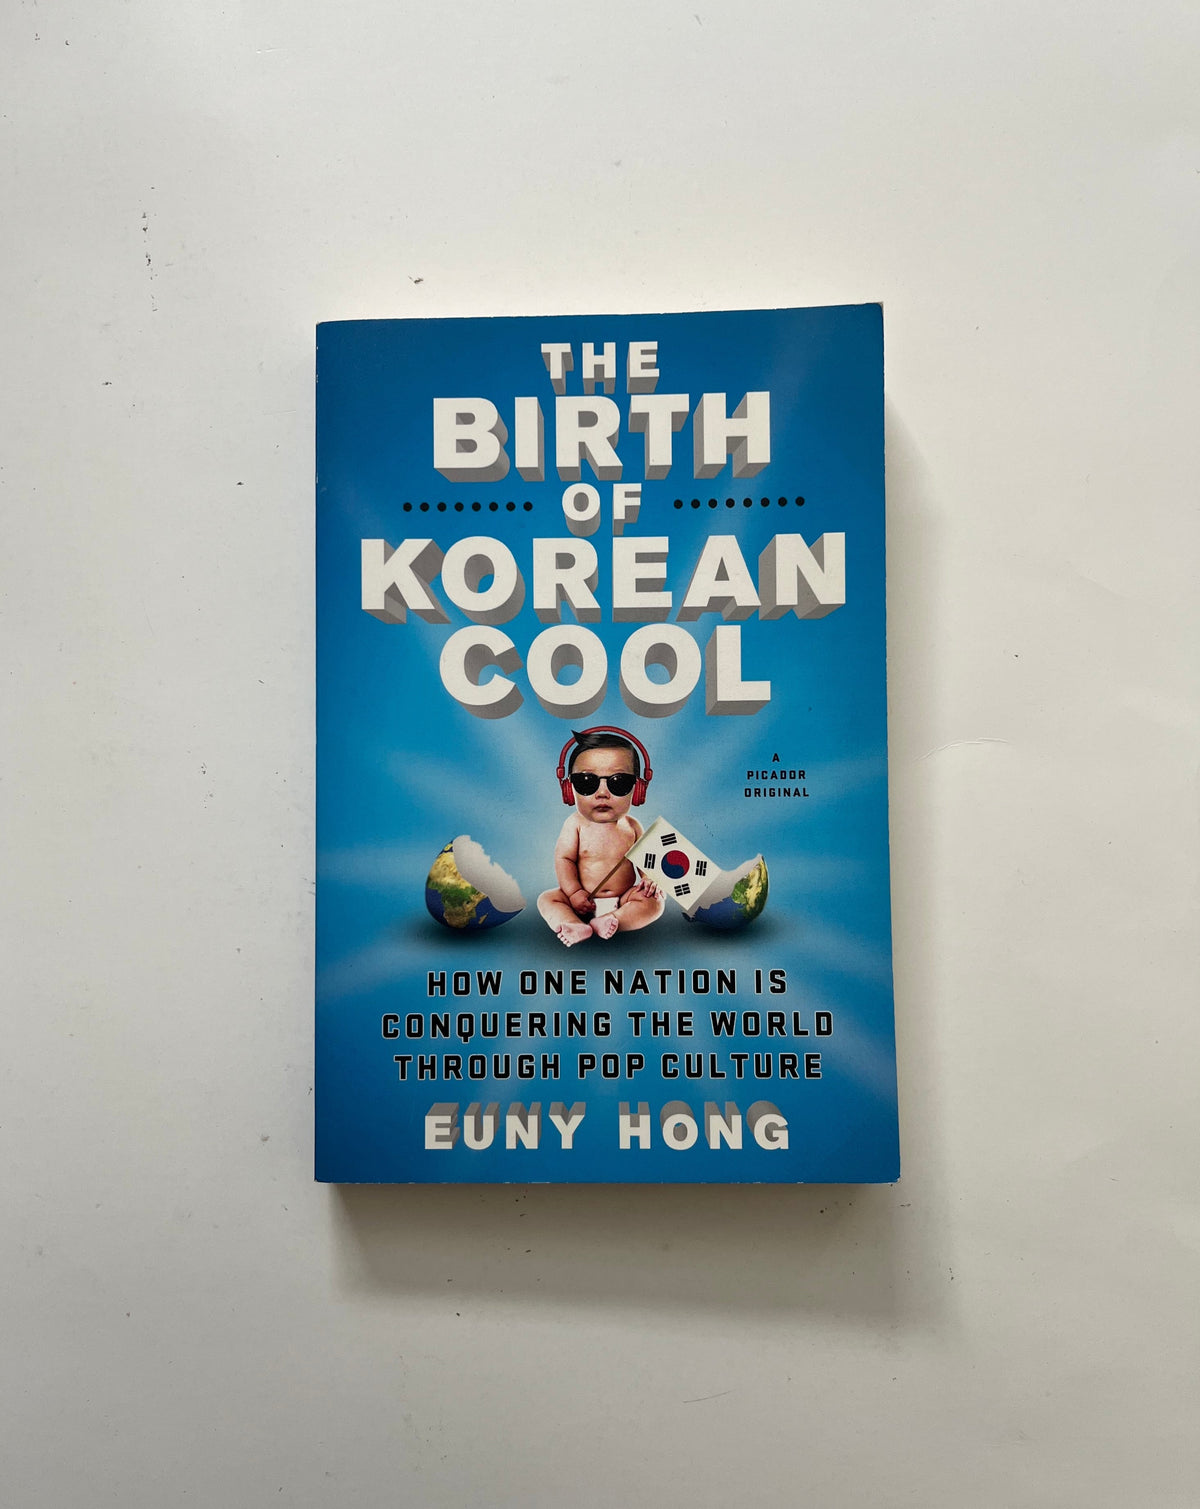 The Birth of Korean Cool: How One Nation is Conquering the World Through Culture by Euny Hong